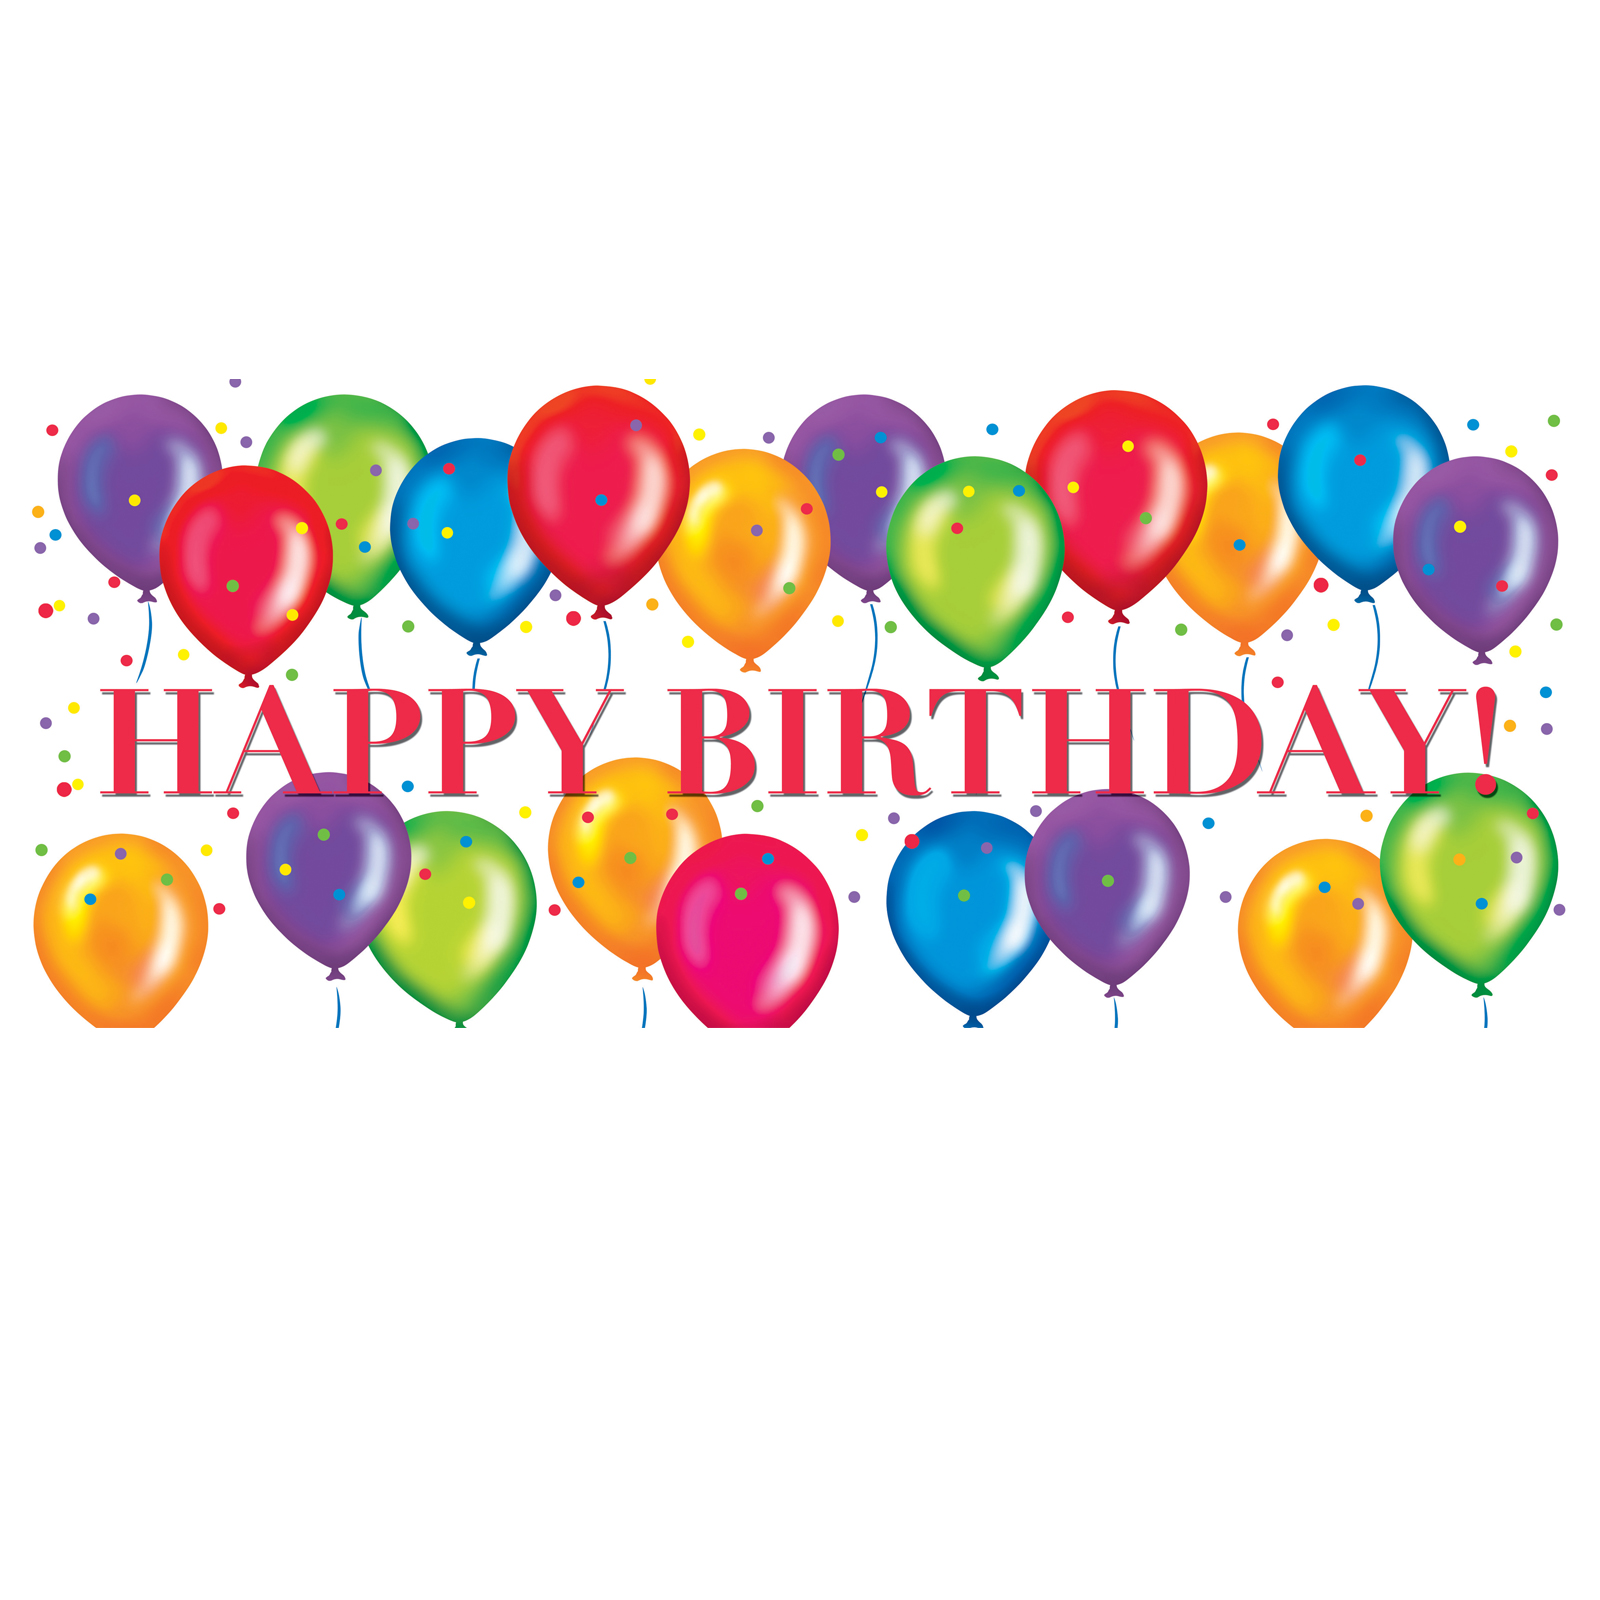 Free Birthday Clip Art For Men | Clipart Panda - Free Clipart Images